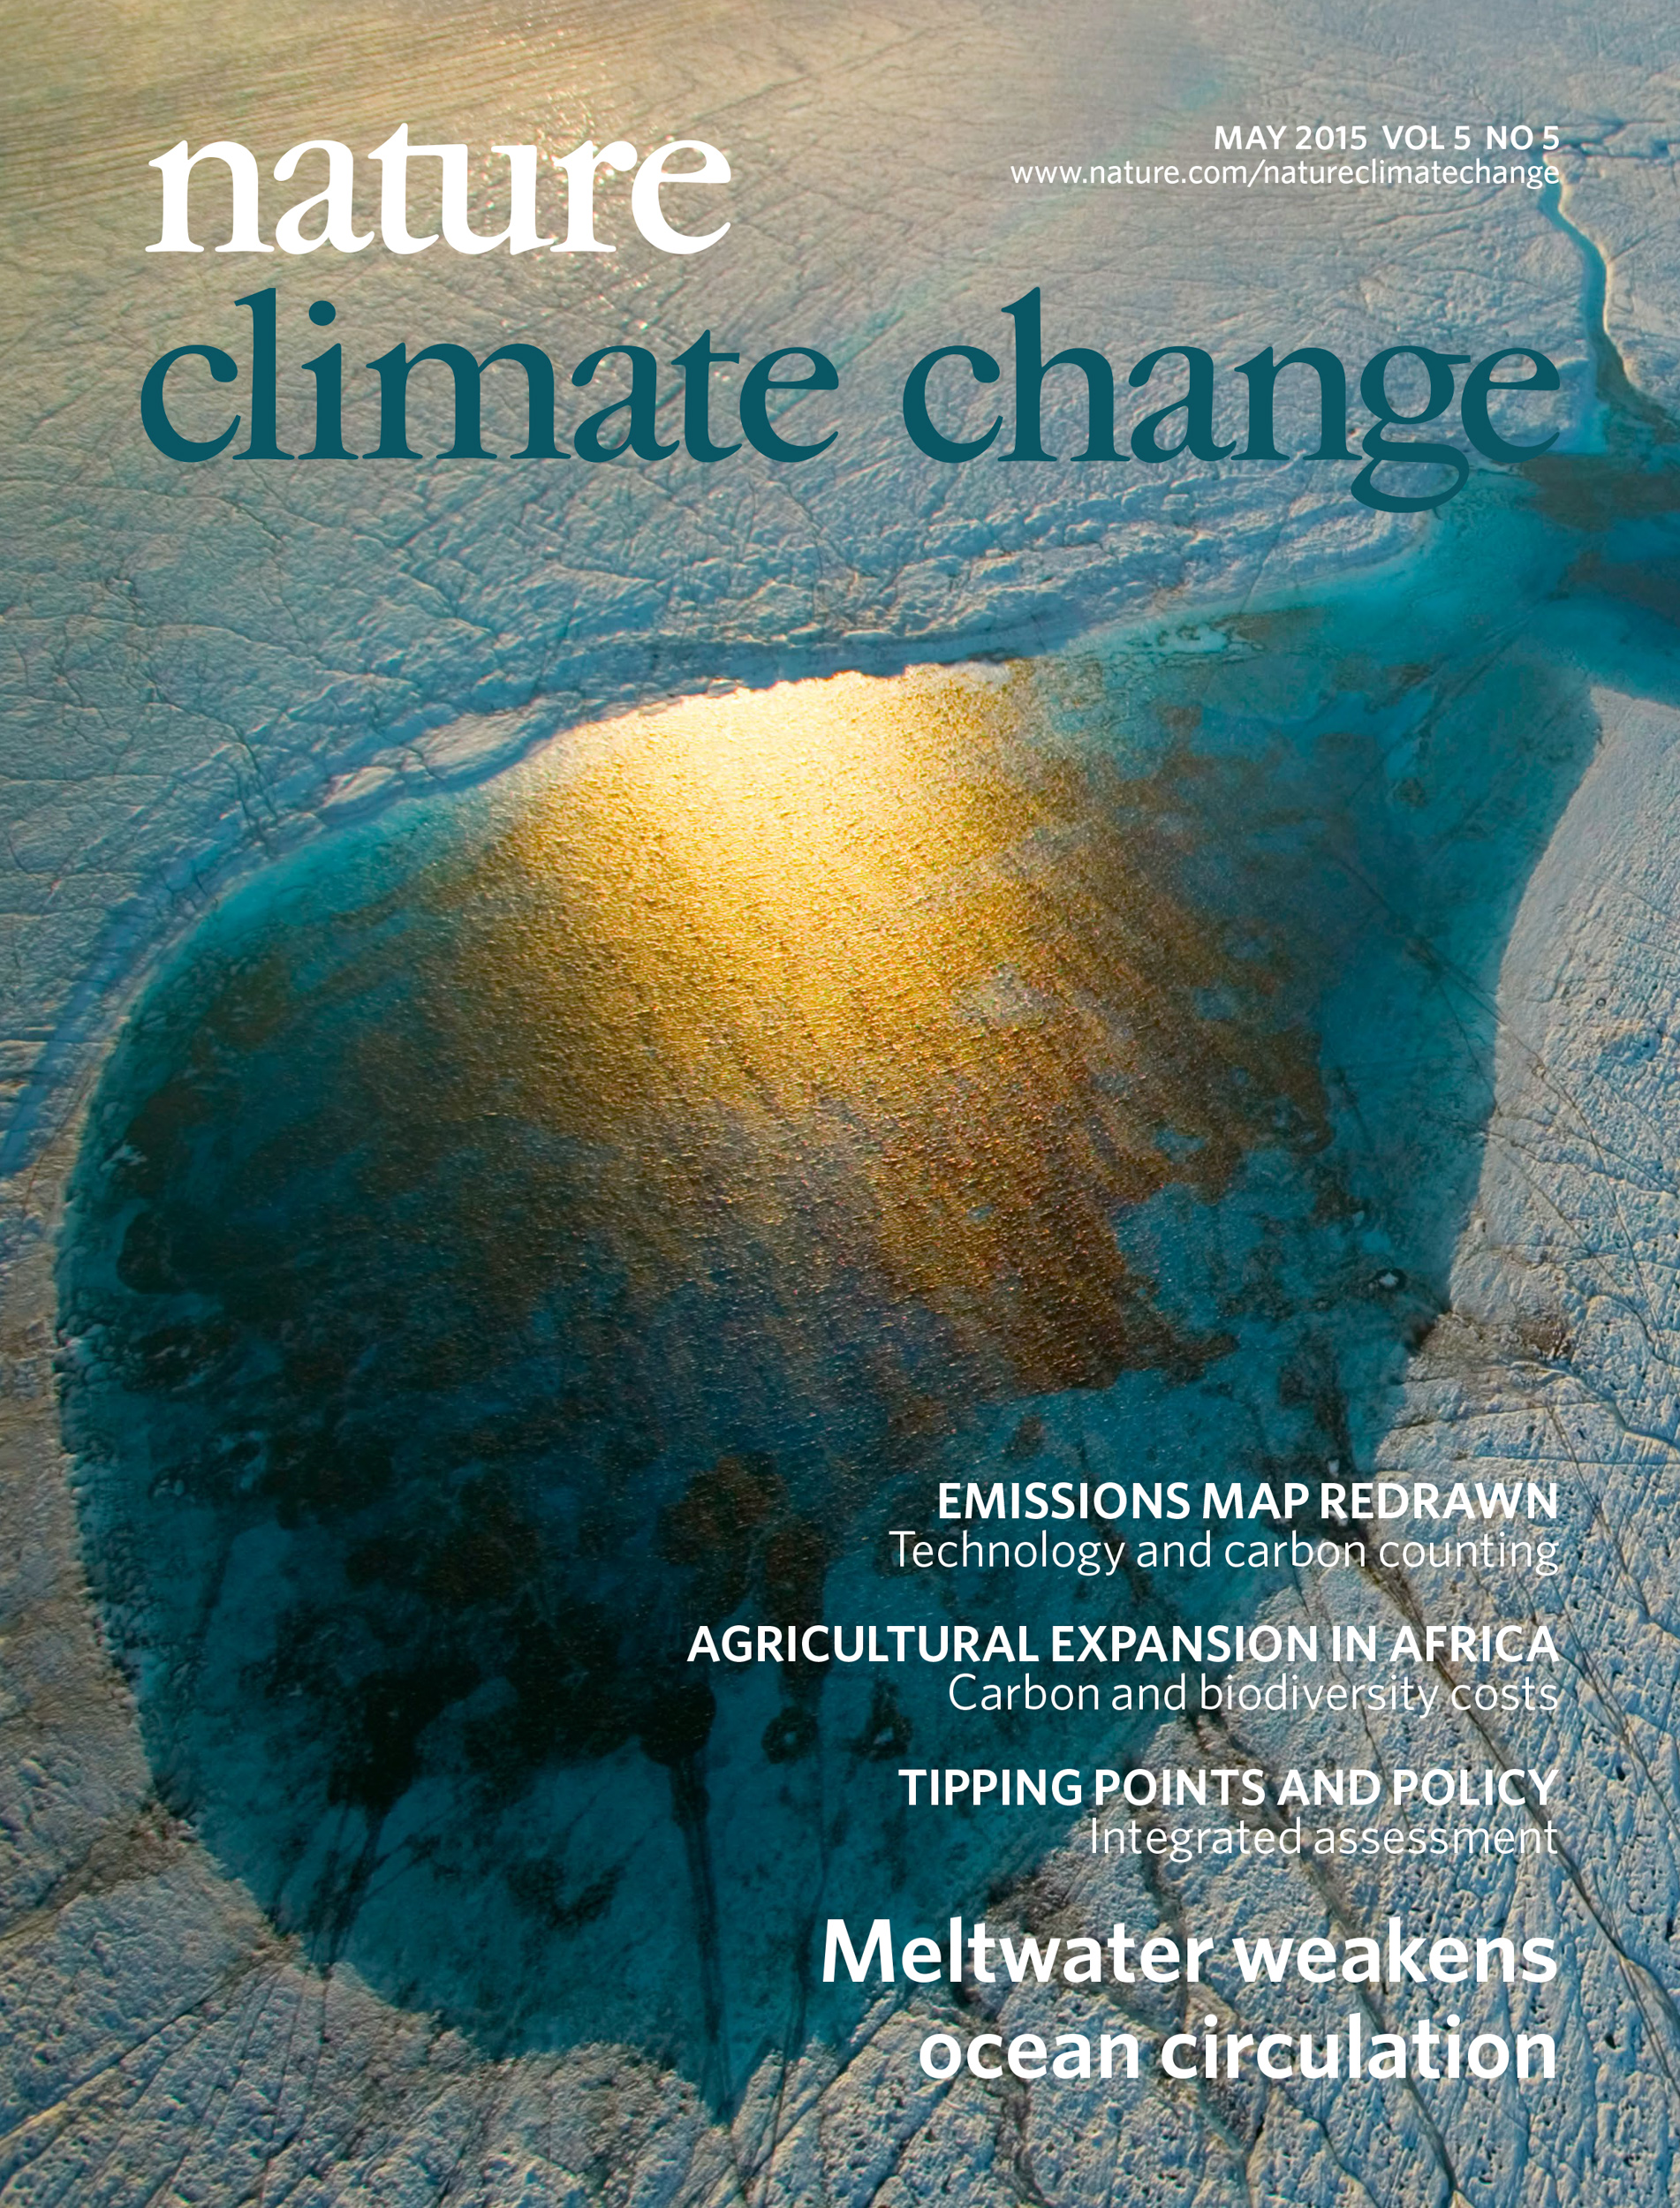 nclimate_cover_MAY15-option2.jpg